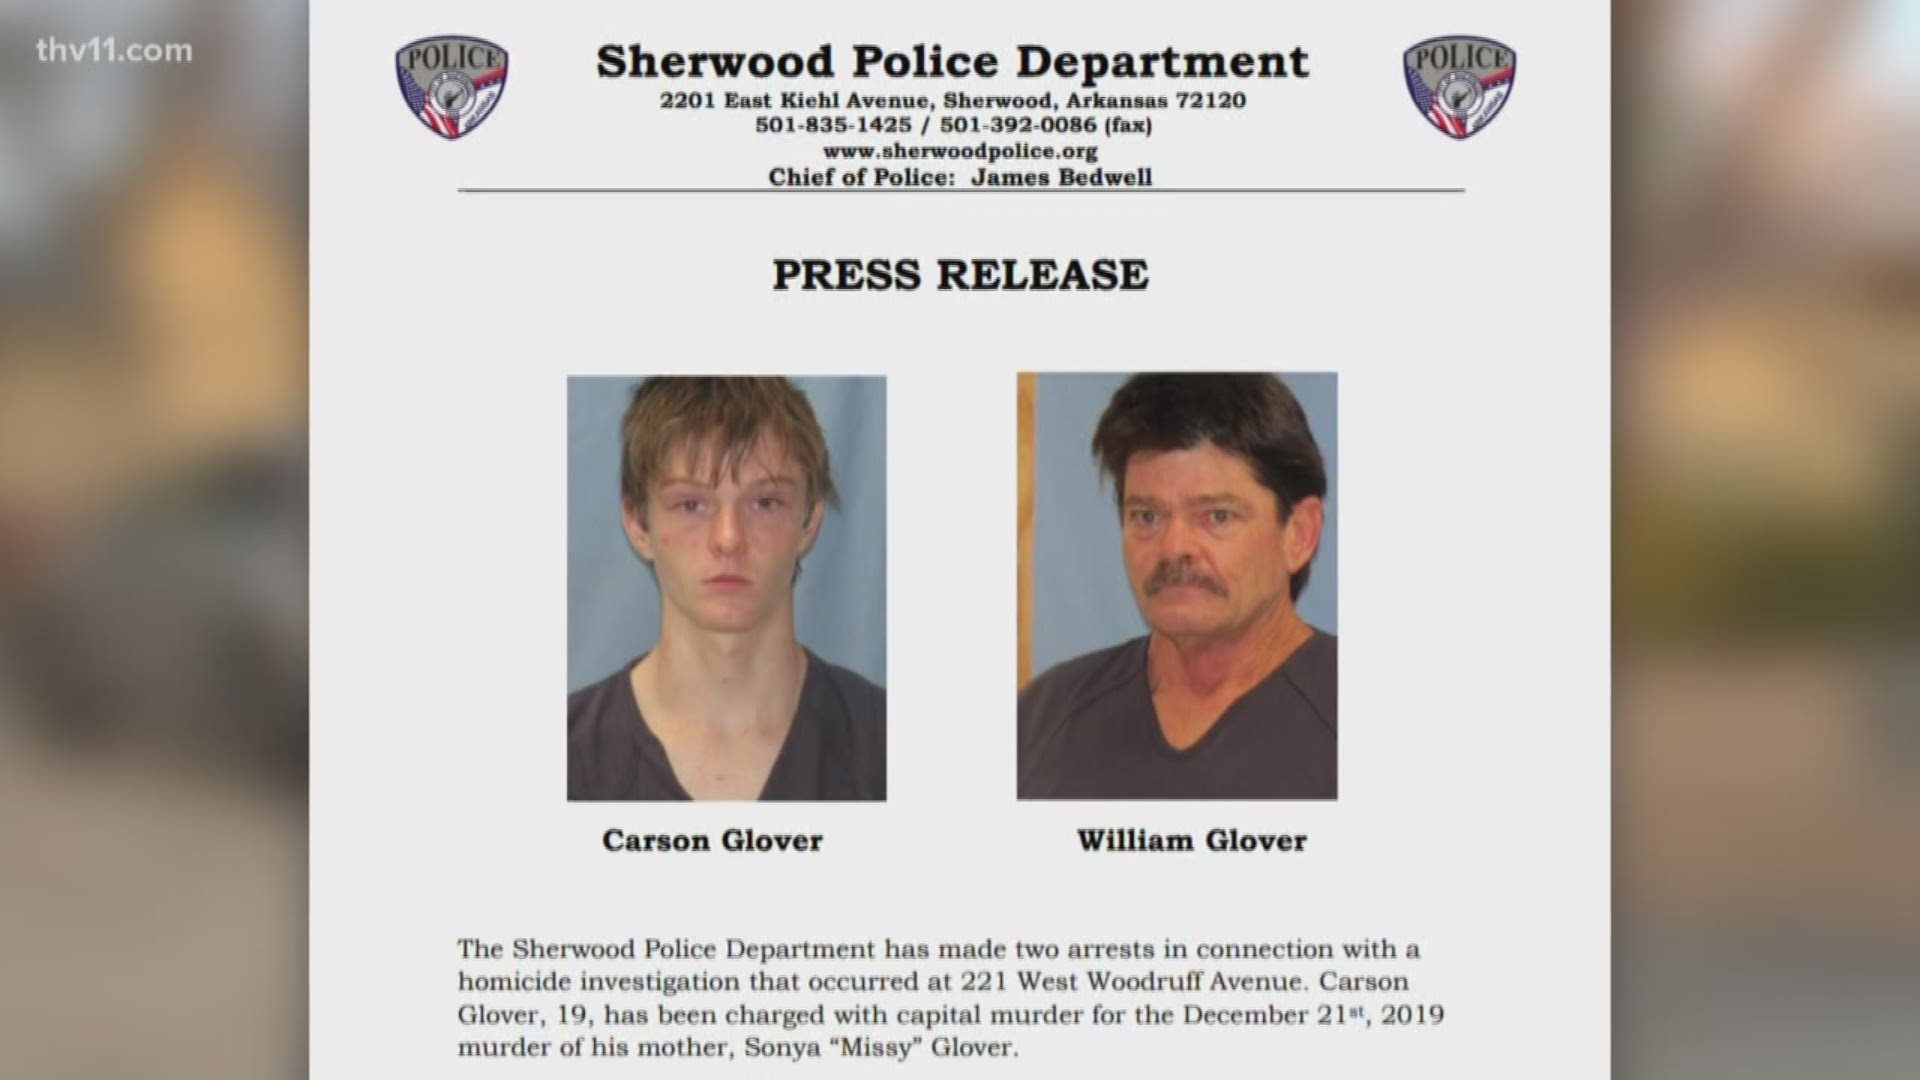 Carson Glover, 19, was arrested for capital murder. William Glover, 55, was charged with hindering apprehension or prosecution.